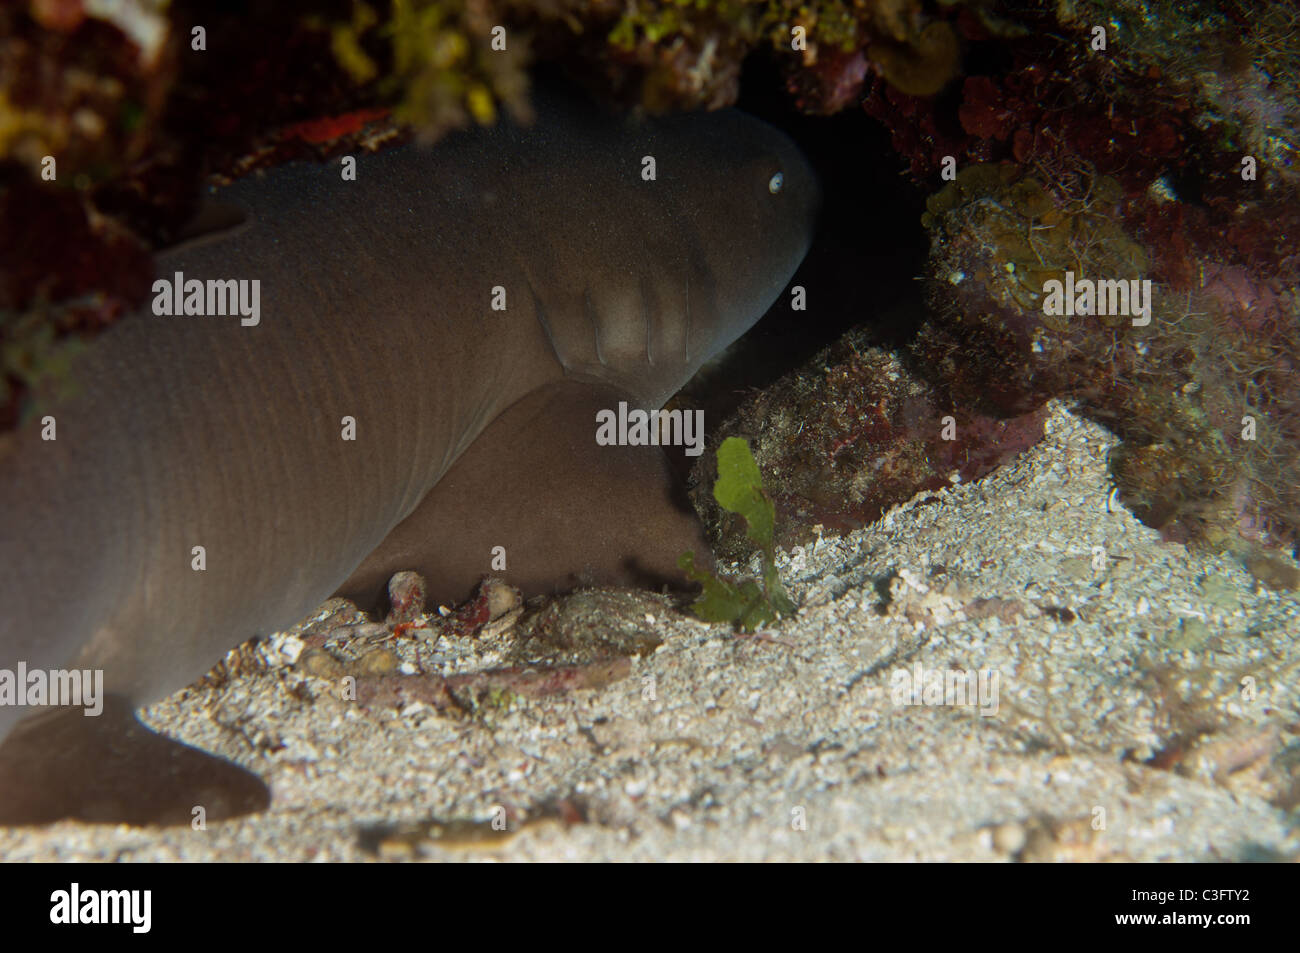 Nurse sharks commonly take shelter under large coral overhangs and outcroppings. Stock Photo